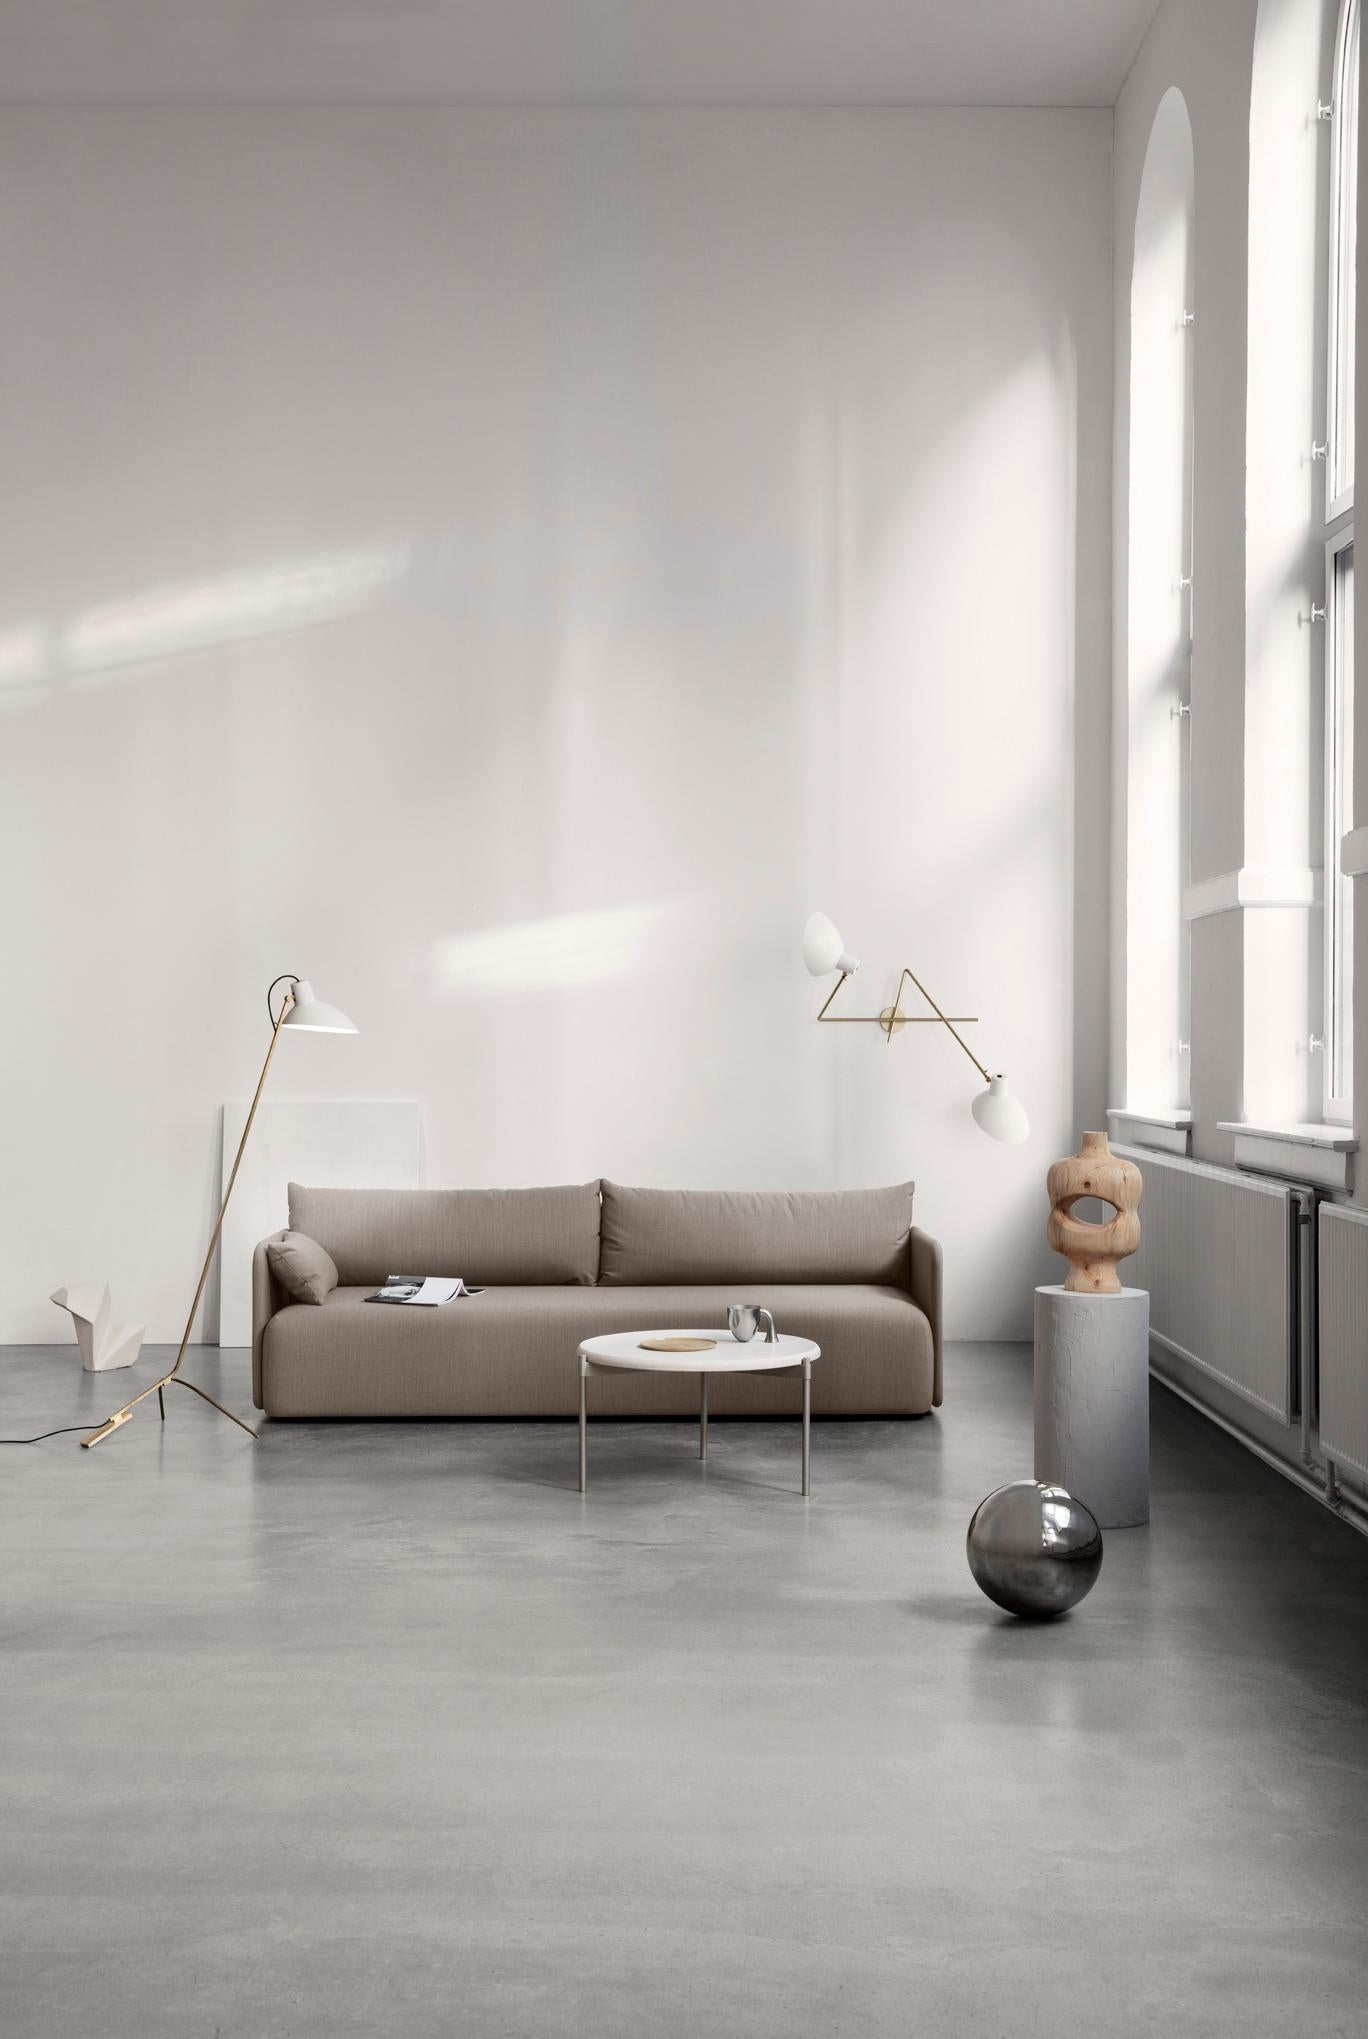 VV Cinquanta White and Brass Floor Lamp Designed by Vittoriano Viganò for Astep 11